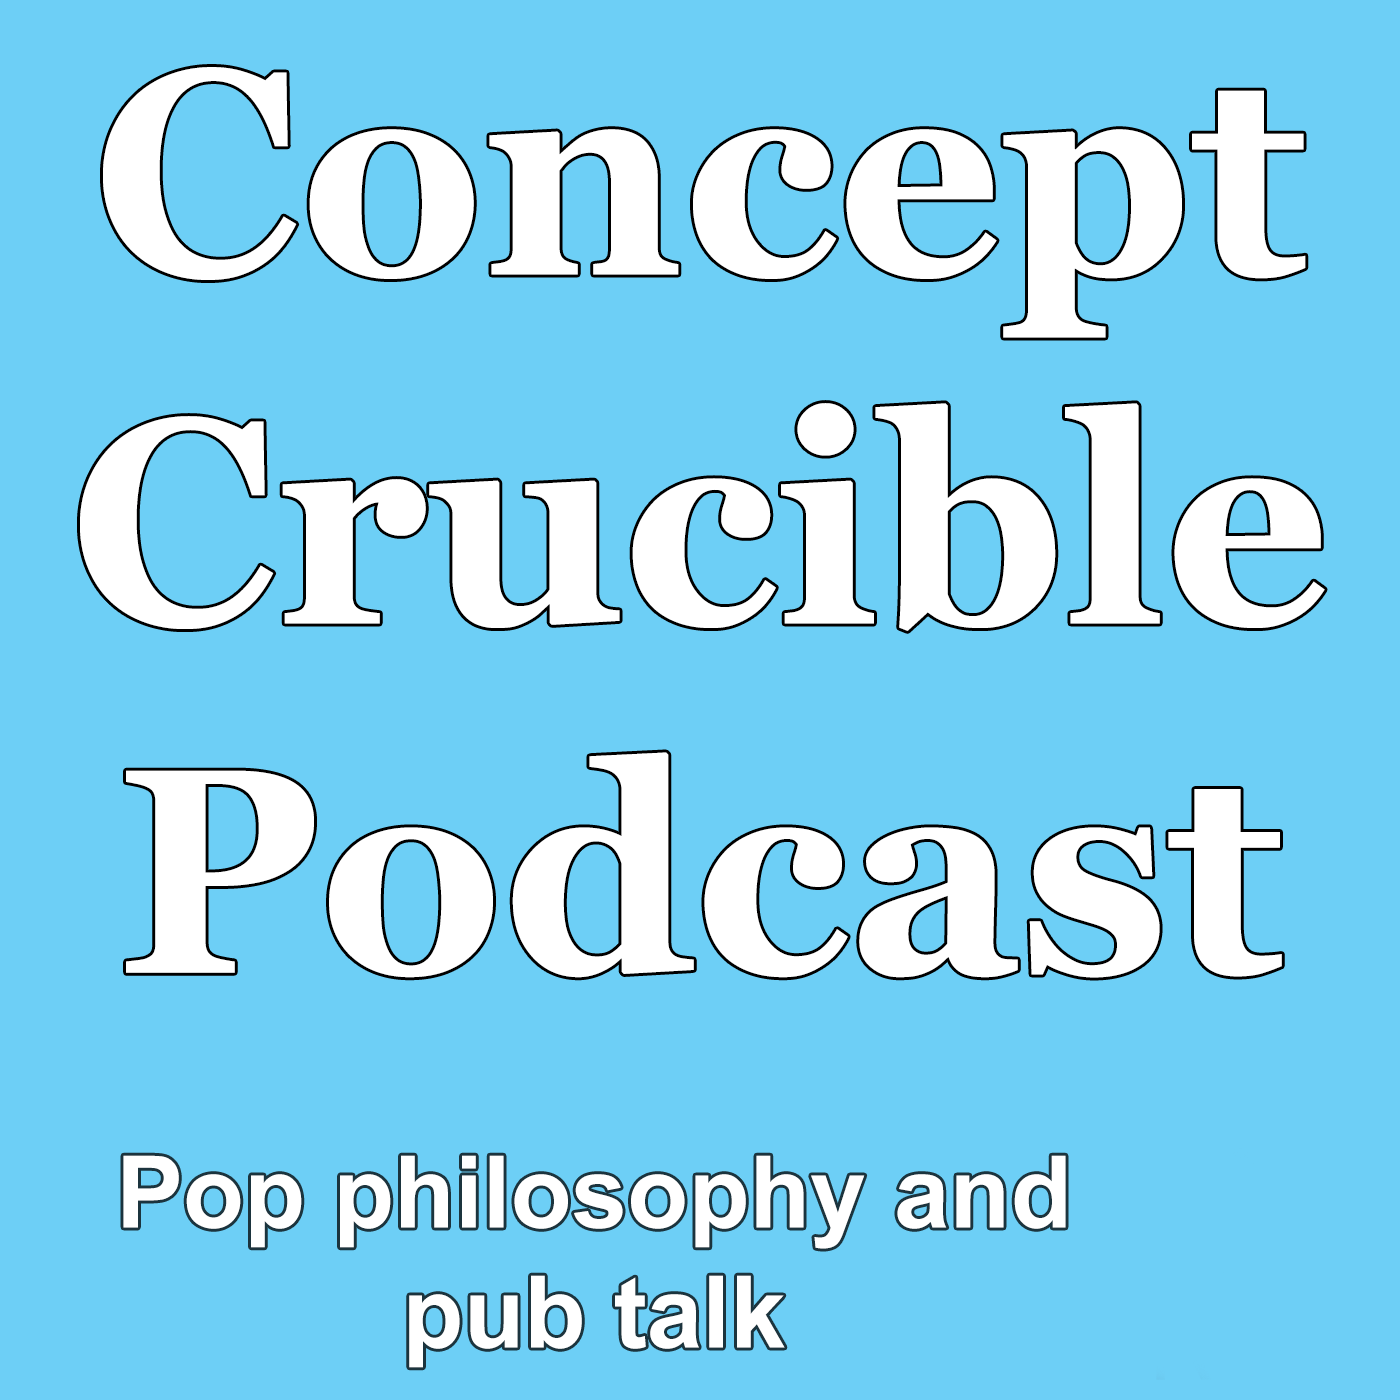 Concept Crucible, a philosophy blog and podcast